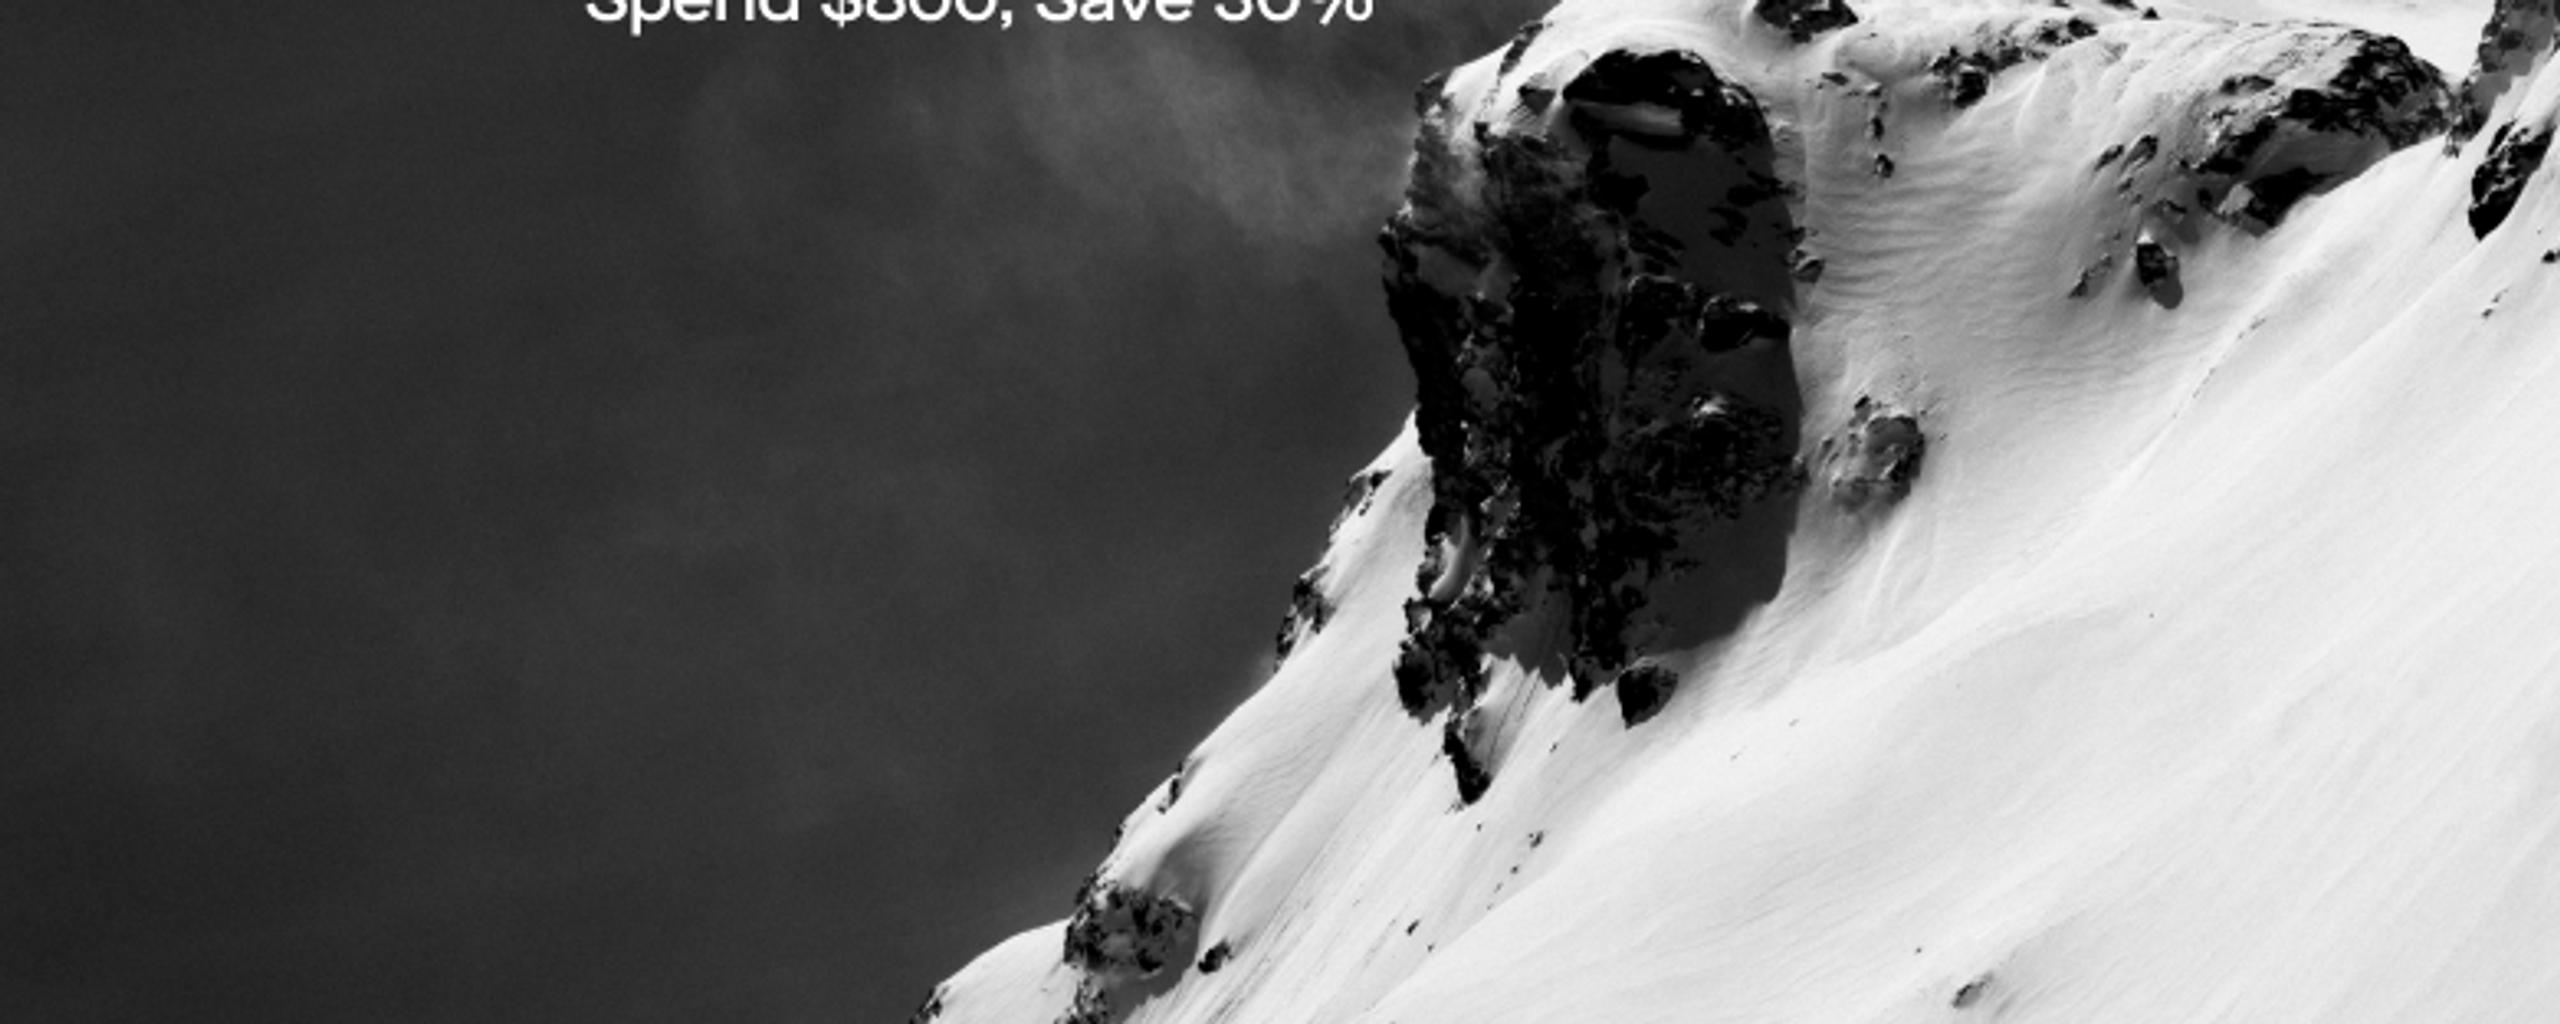 Black and white photo rock cliffs covered in snow